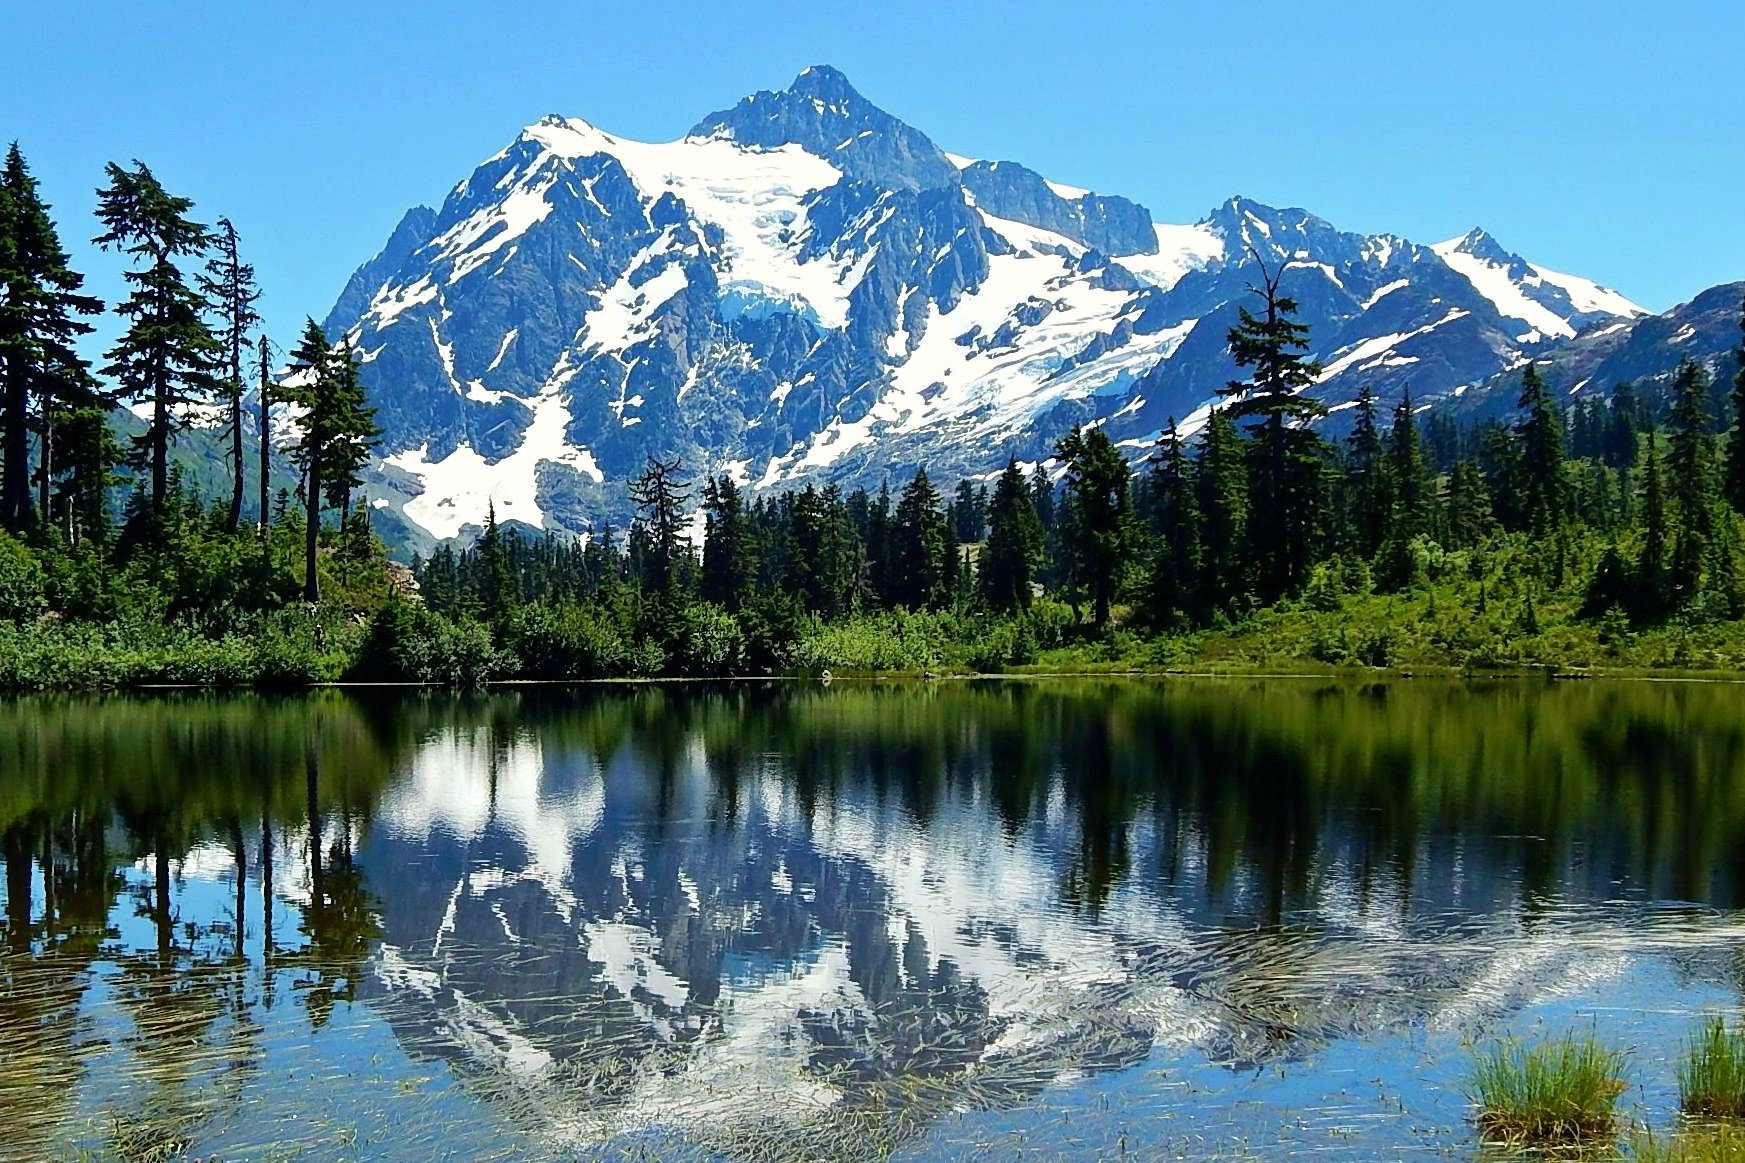 great places to visit in washington state